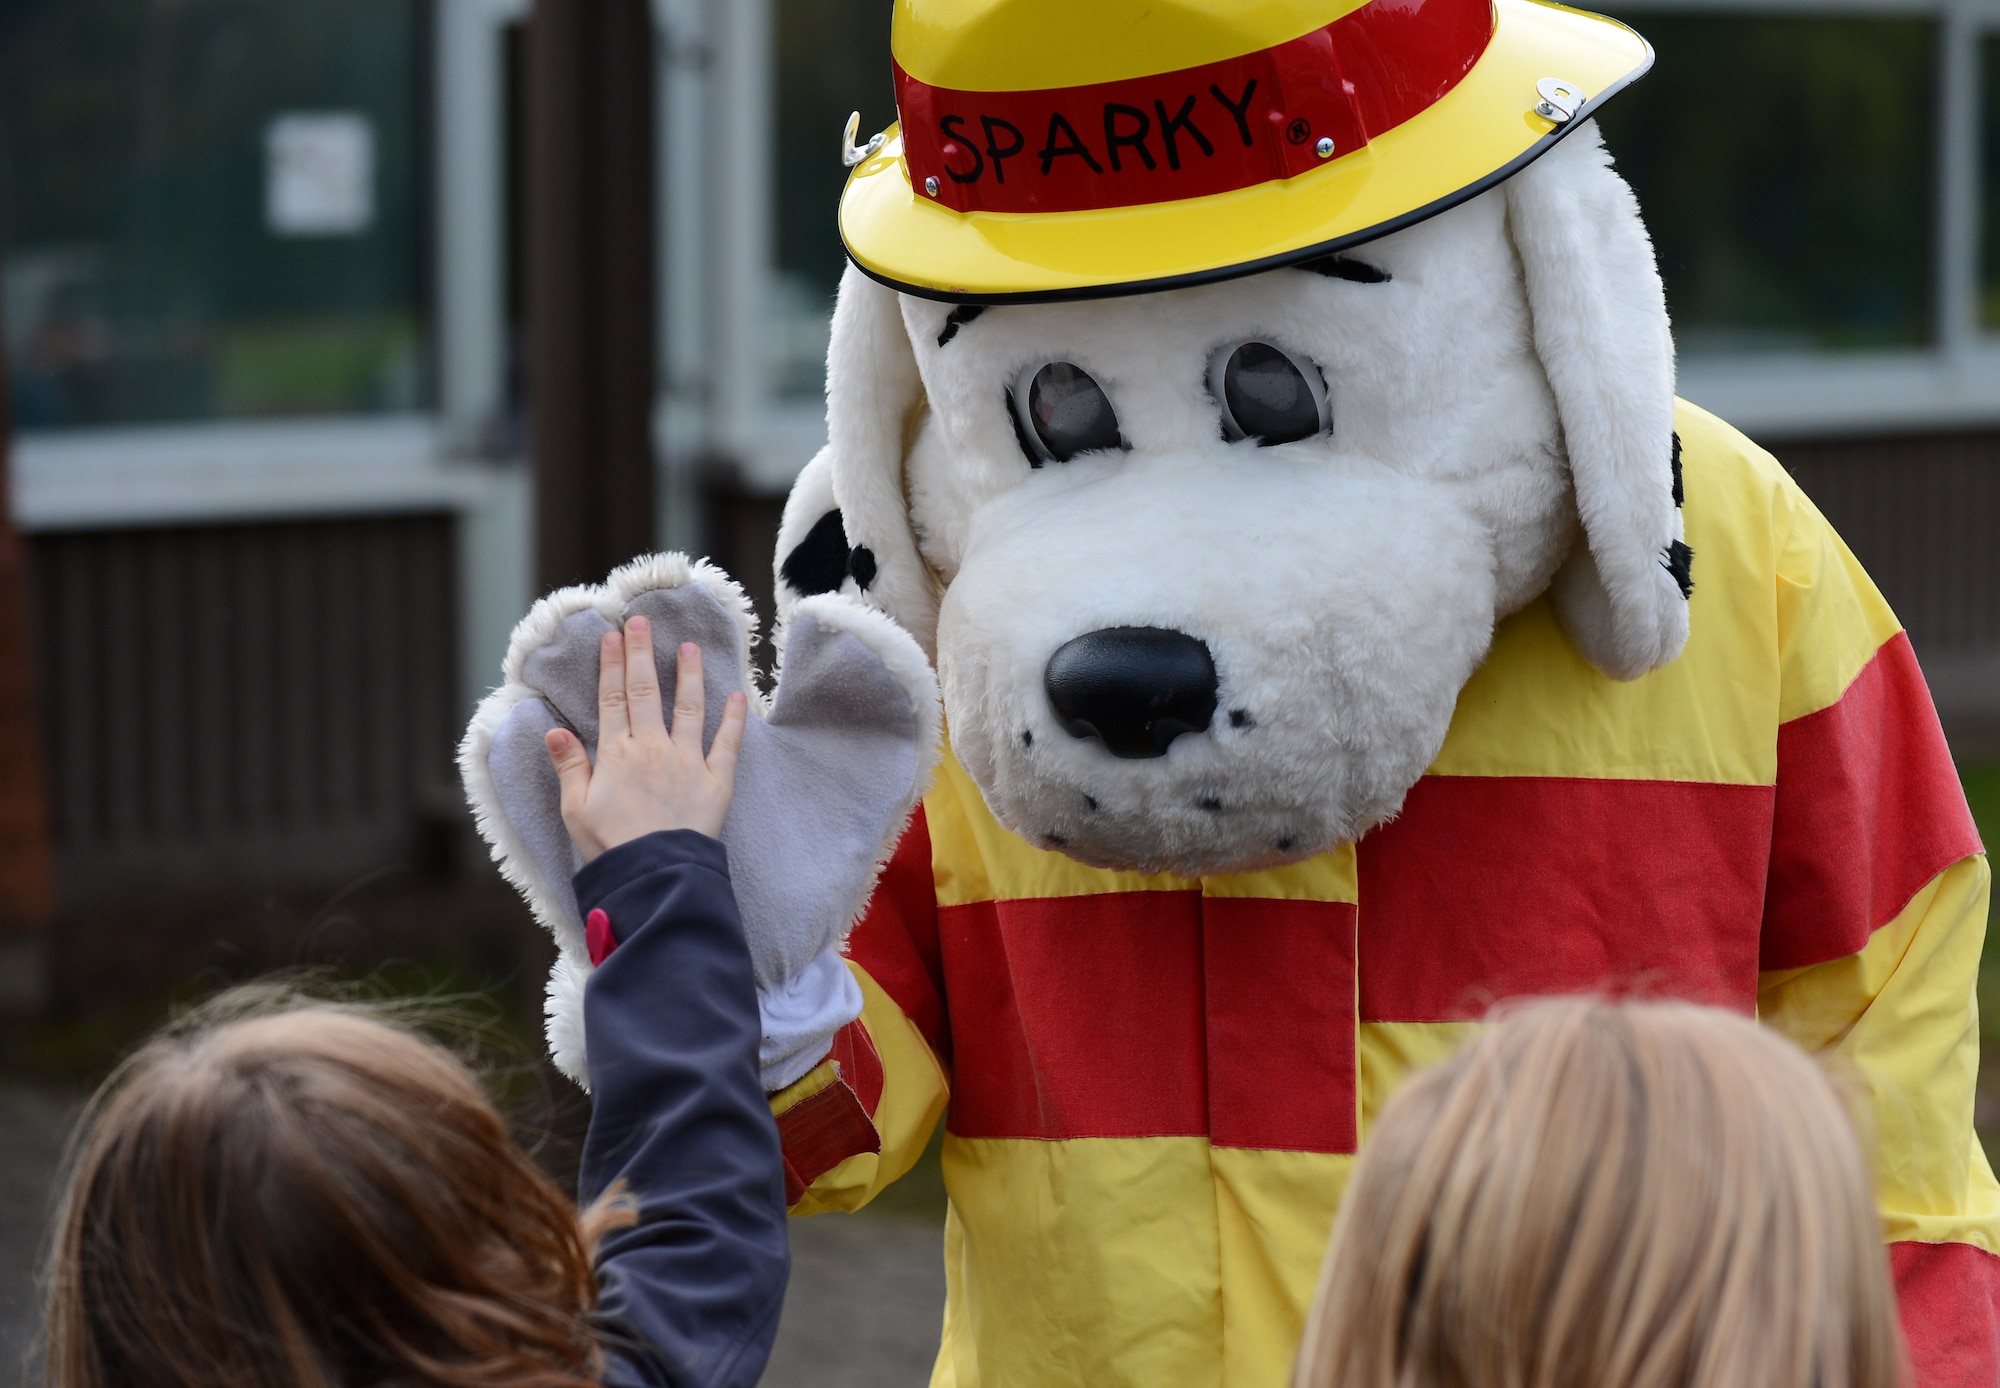 Sparky, the 52nd Civil Engineer Squadron firefighters’ mascot, high-fives a student during a visit from the CES firefighters at Spangdahlem Elementary School on Spangdahlem Air Base, Germany, Oct. 8, 2014. The firefighters demonstrated the importance of fire-safety to the students in observance of Fire Prevention Week. “A working smoke alarm saves lives” is this year’s theme. (U.S. Air Force photo by Airman 1st Class Luke J. Kitterman/Released)